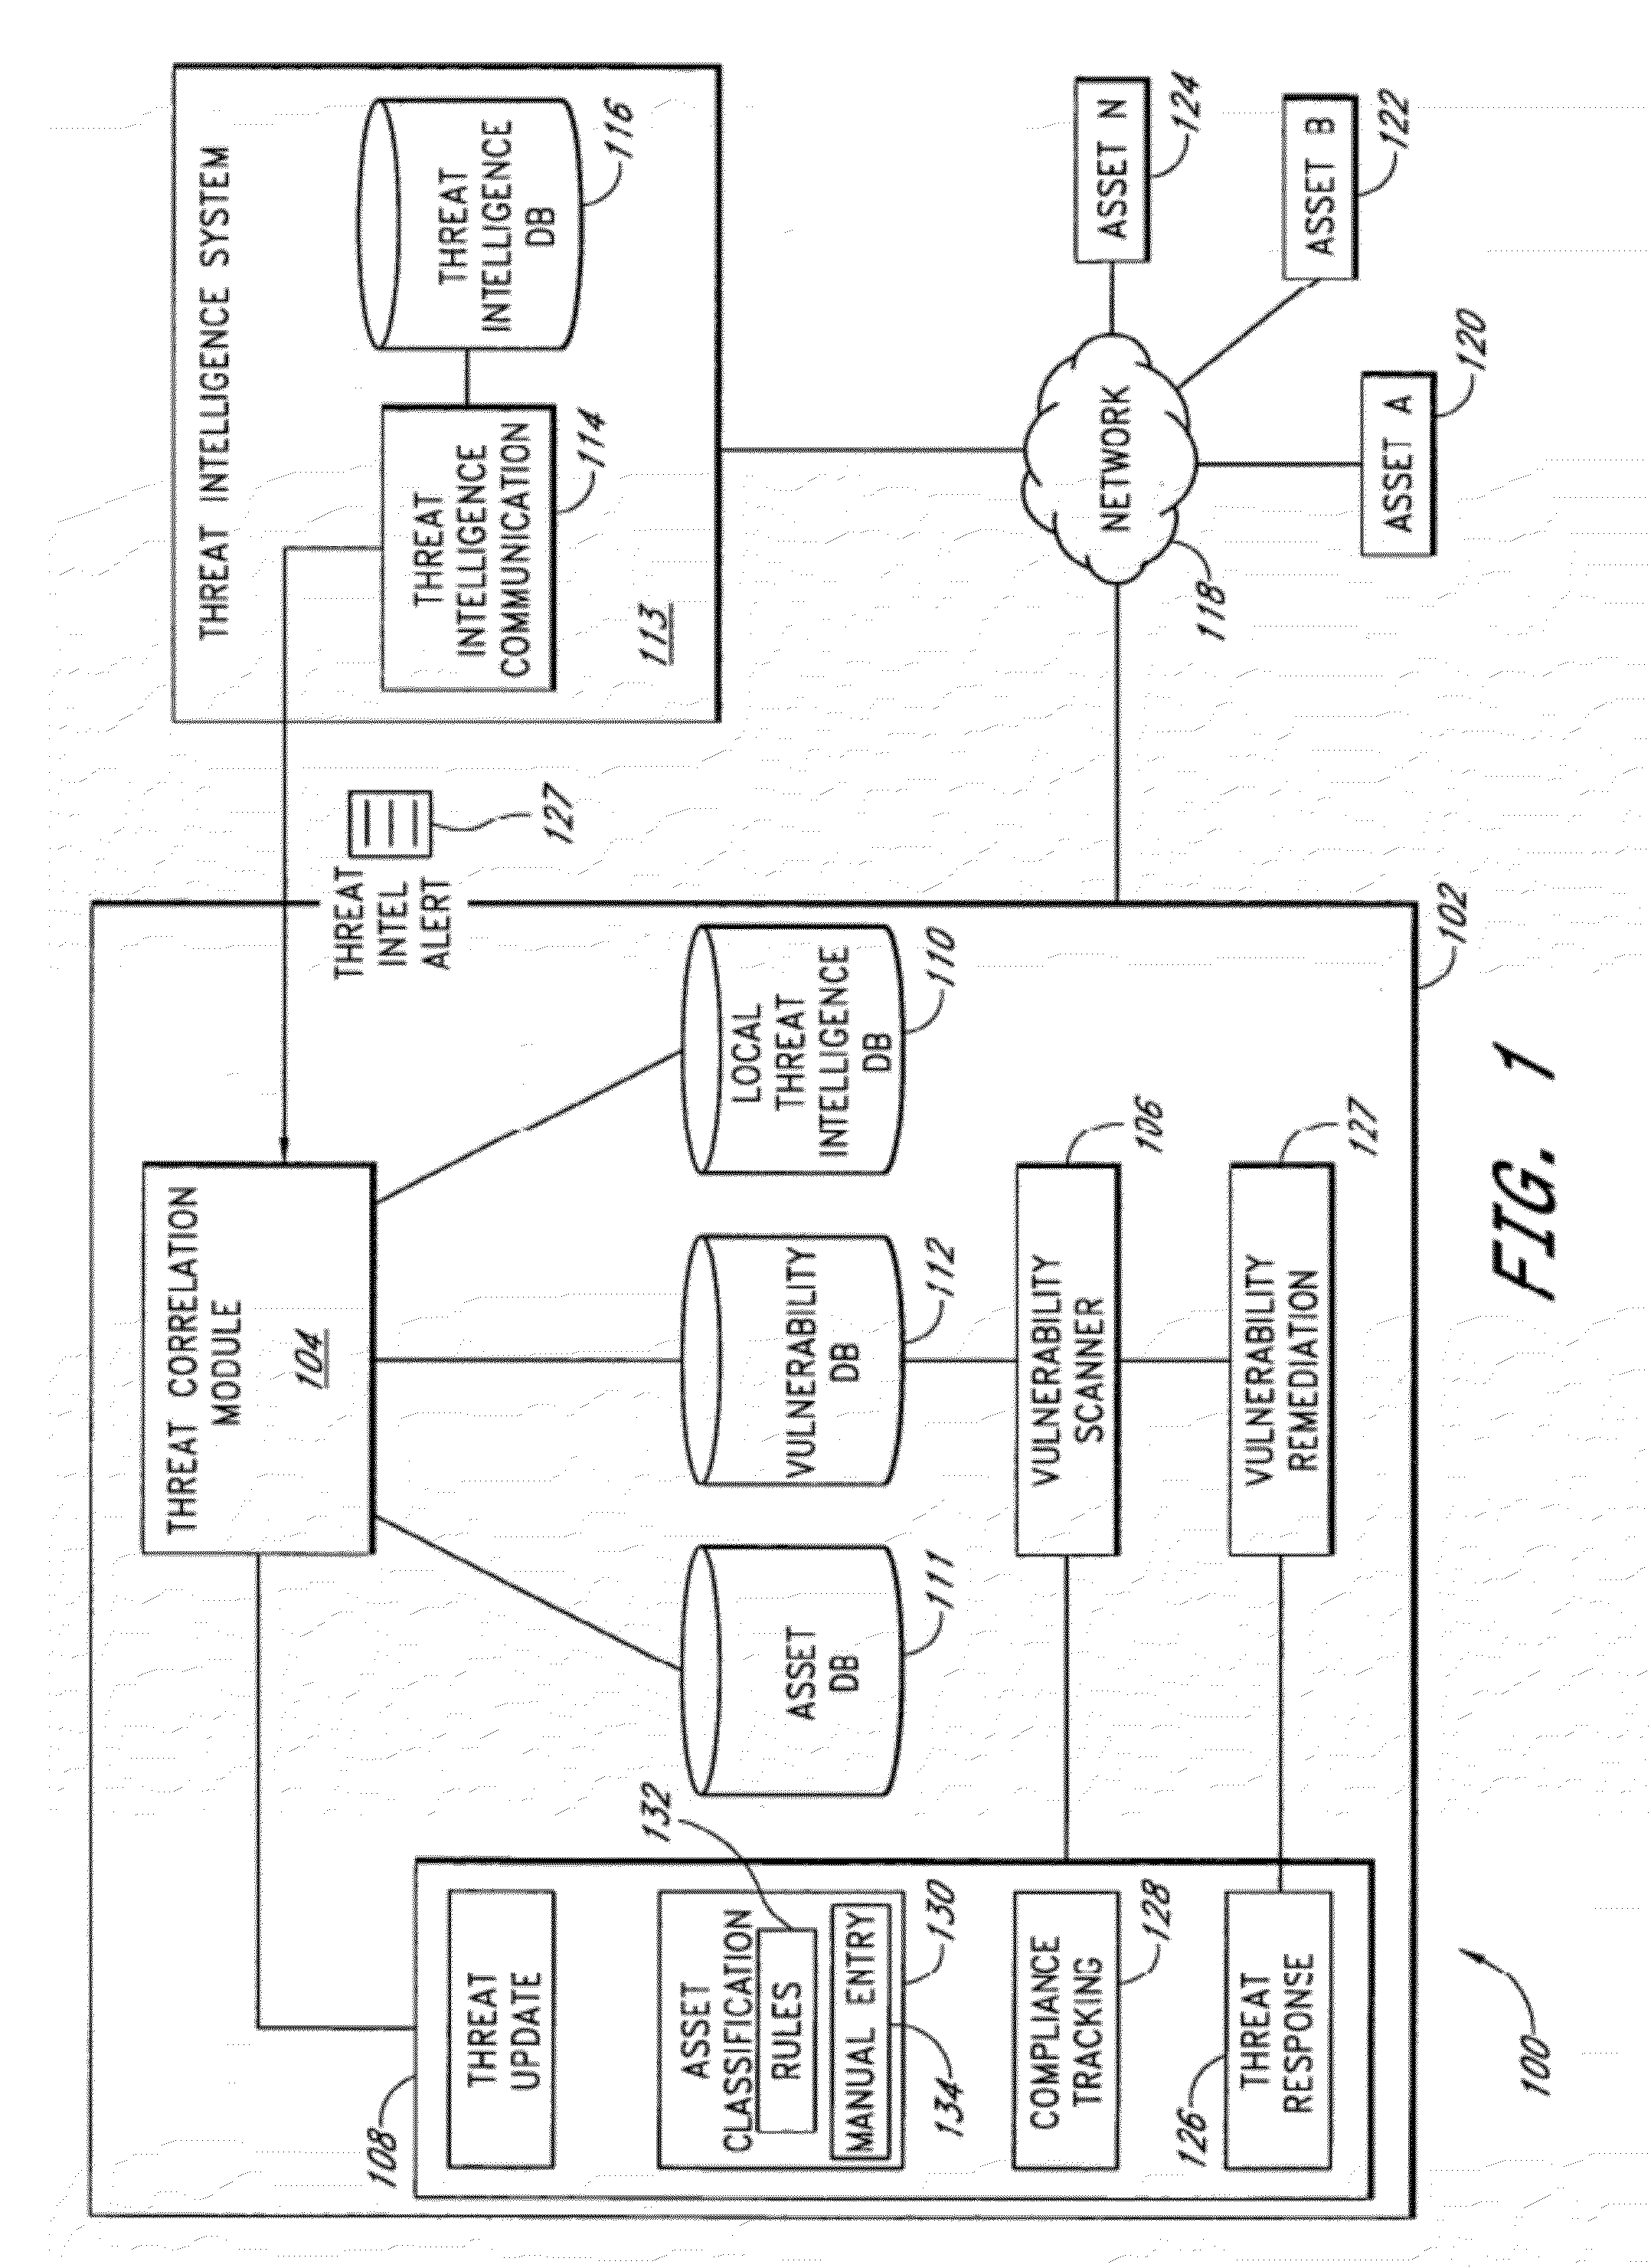 System and method of managing network security risks